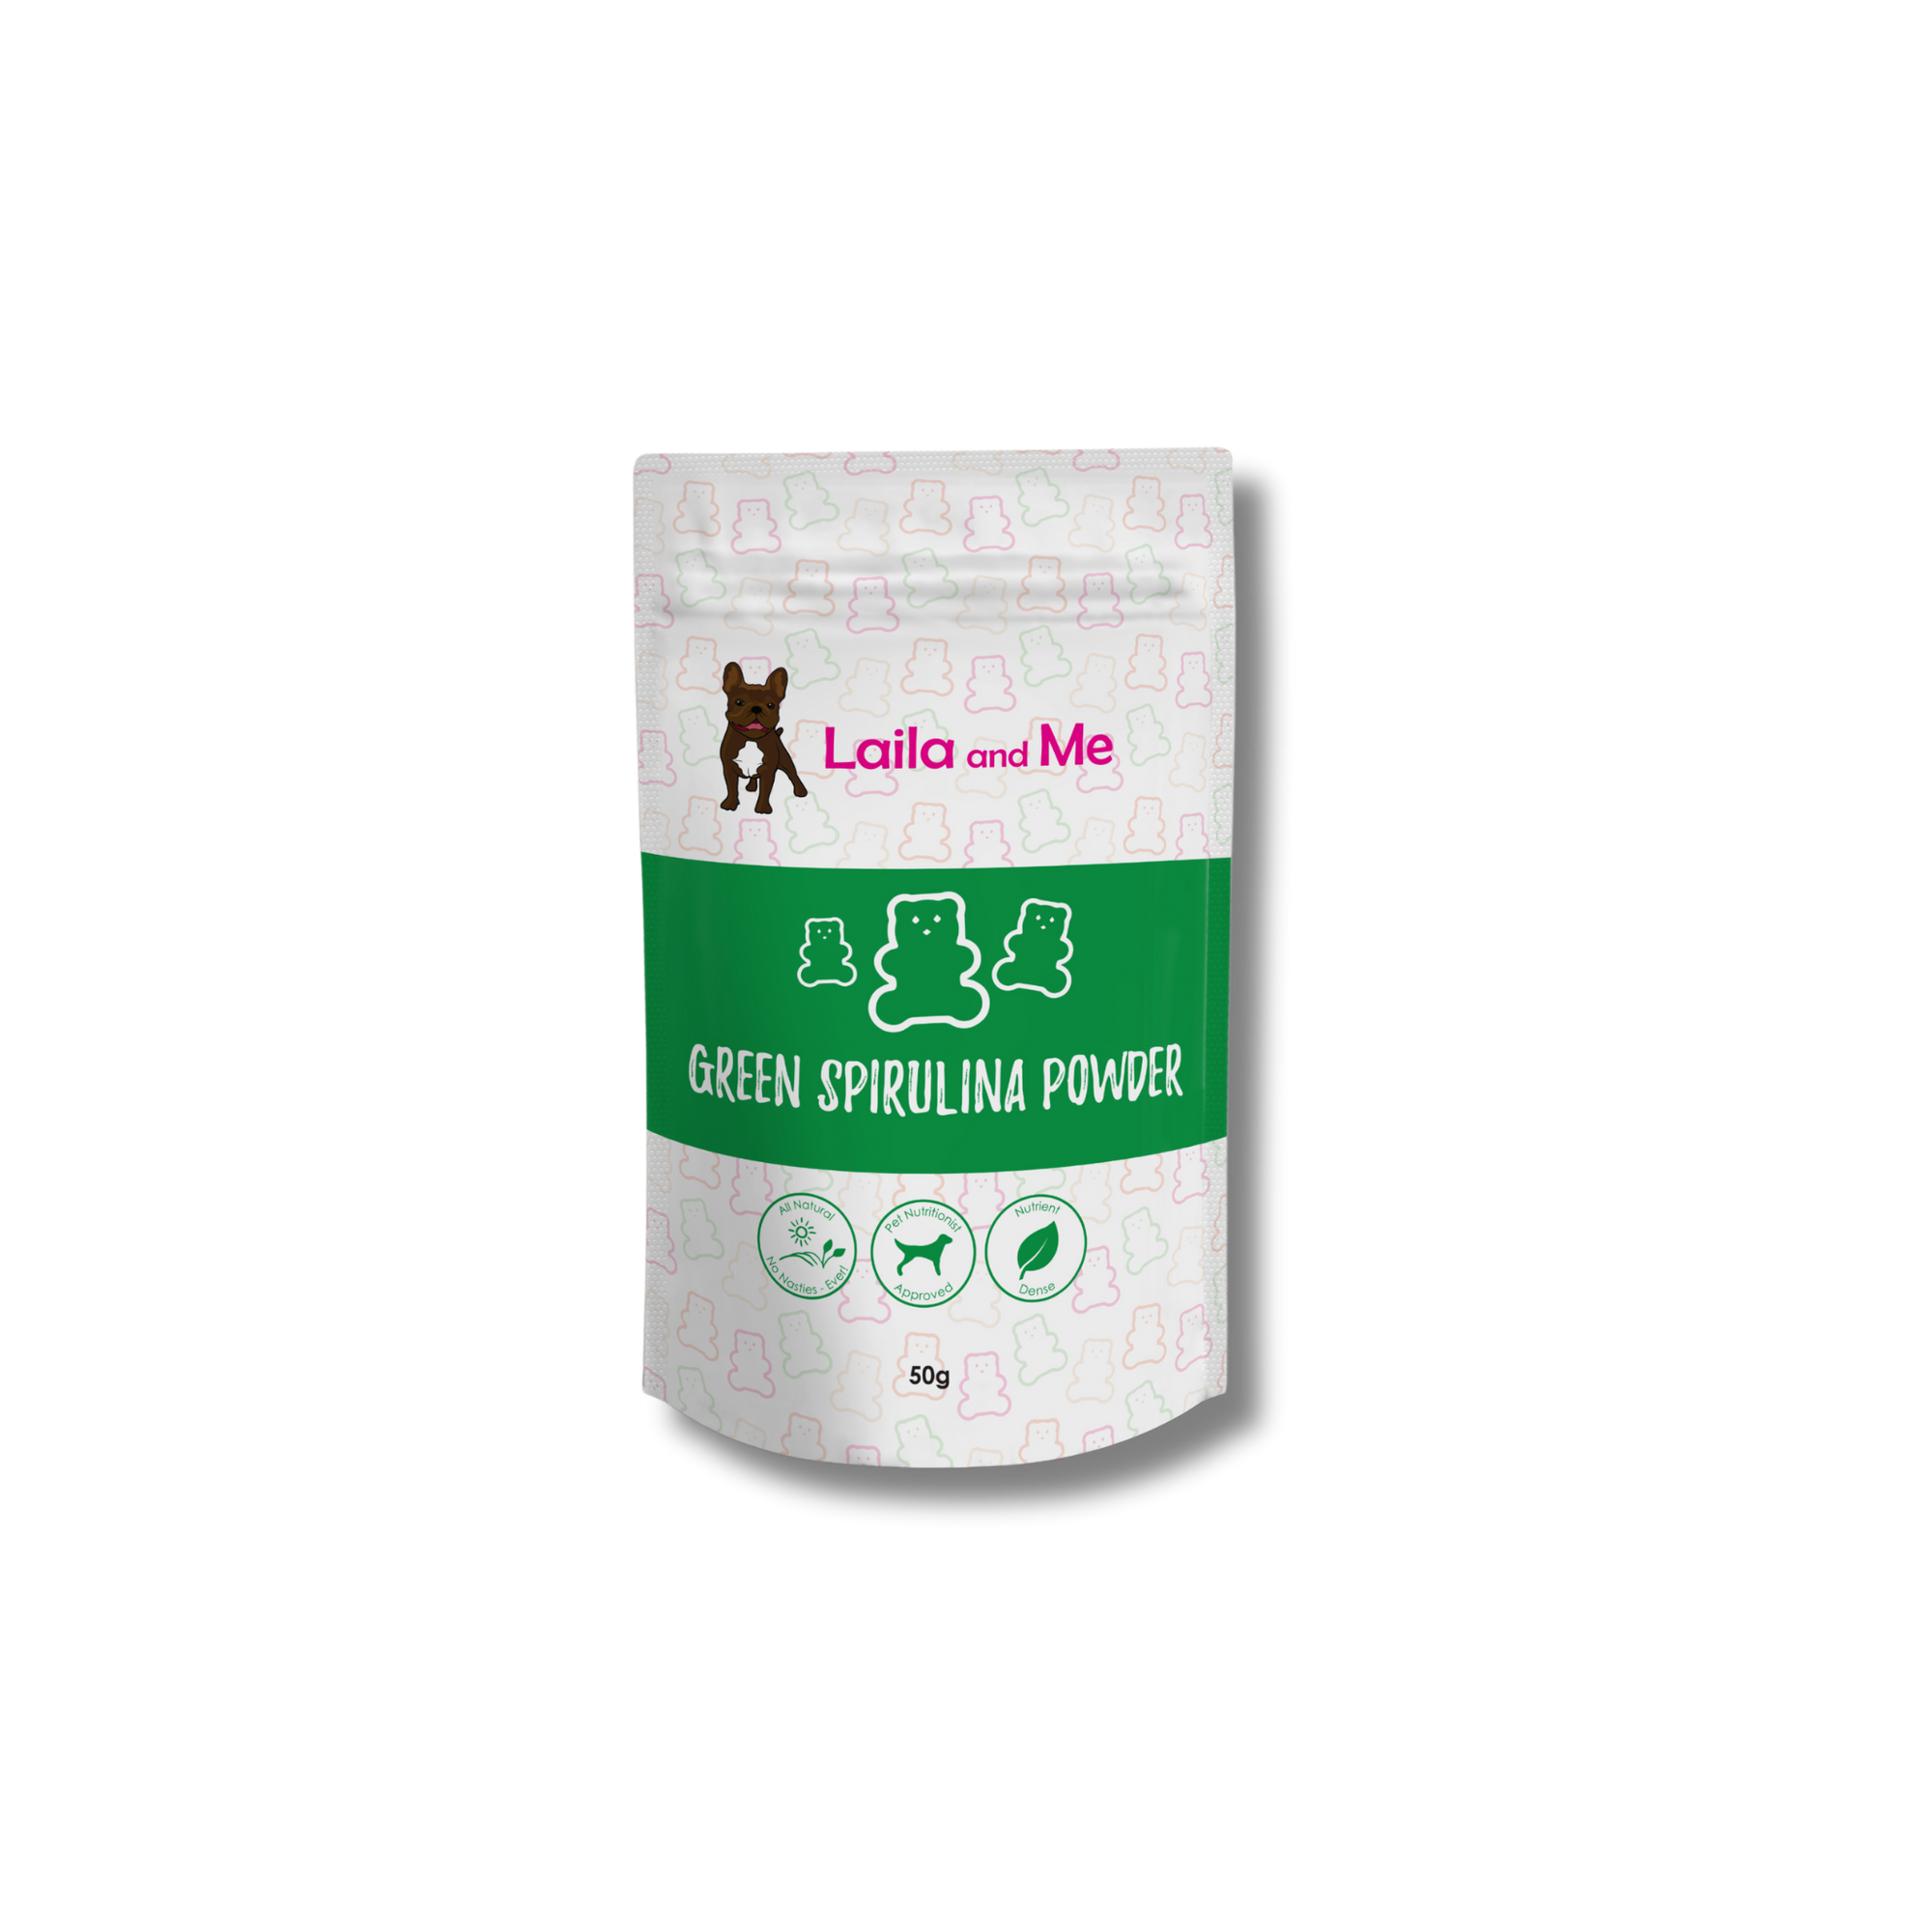 Green Spirulina Powder for Pets - Laila and Me